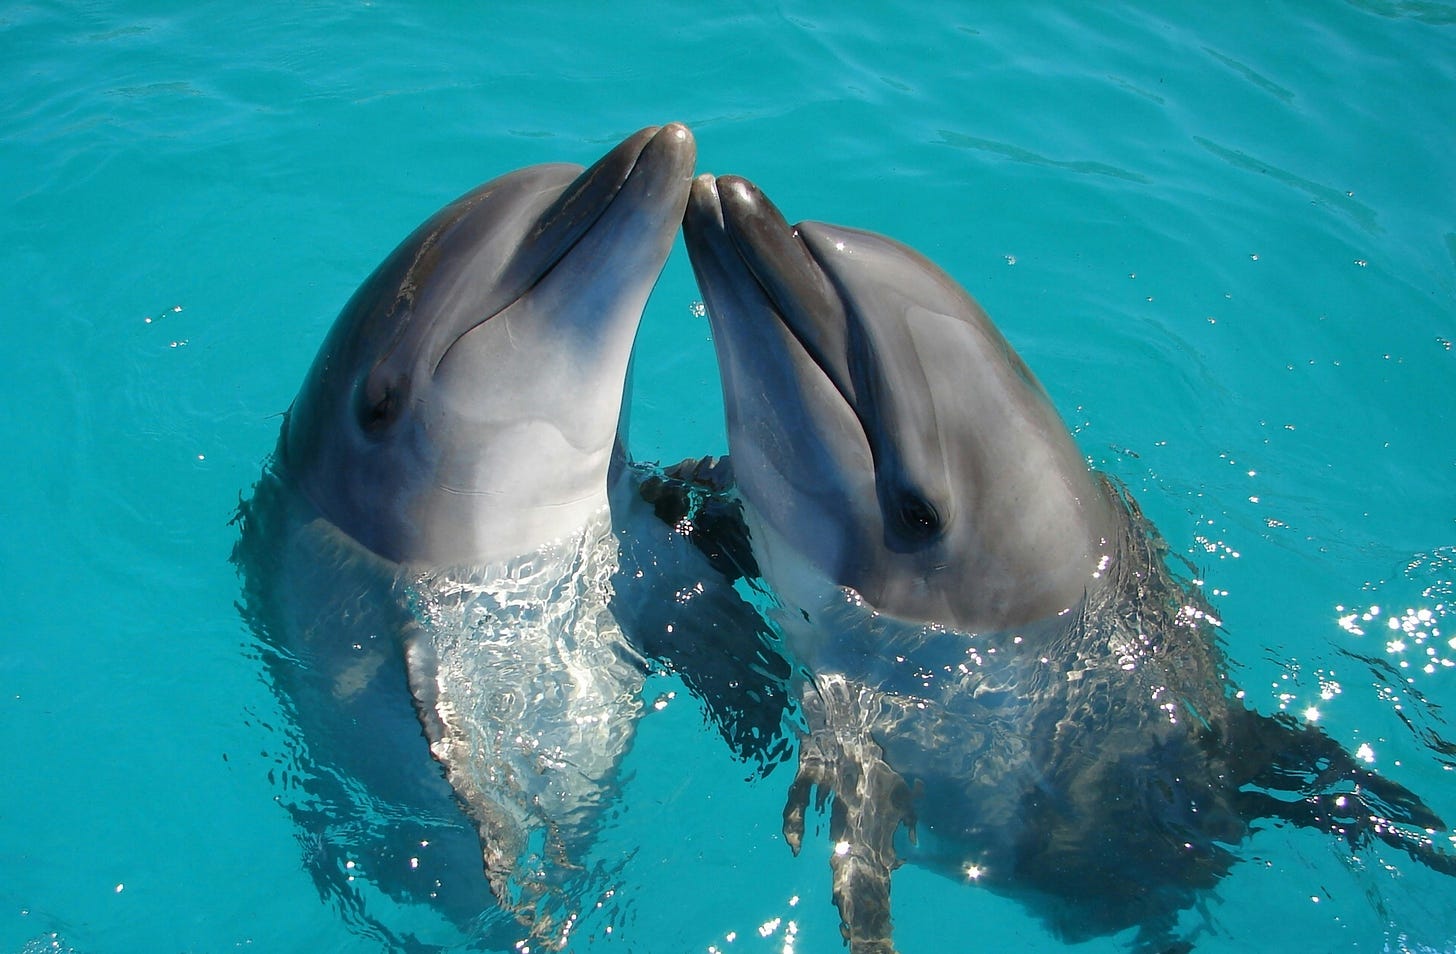 Two dolphins, noses up, appearing to hug while bobbing in clear turquoise-colored water